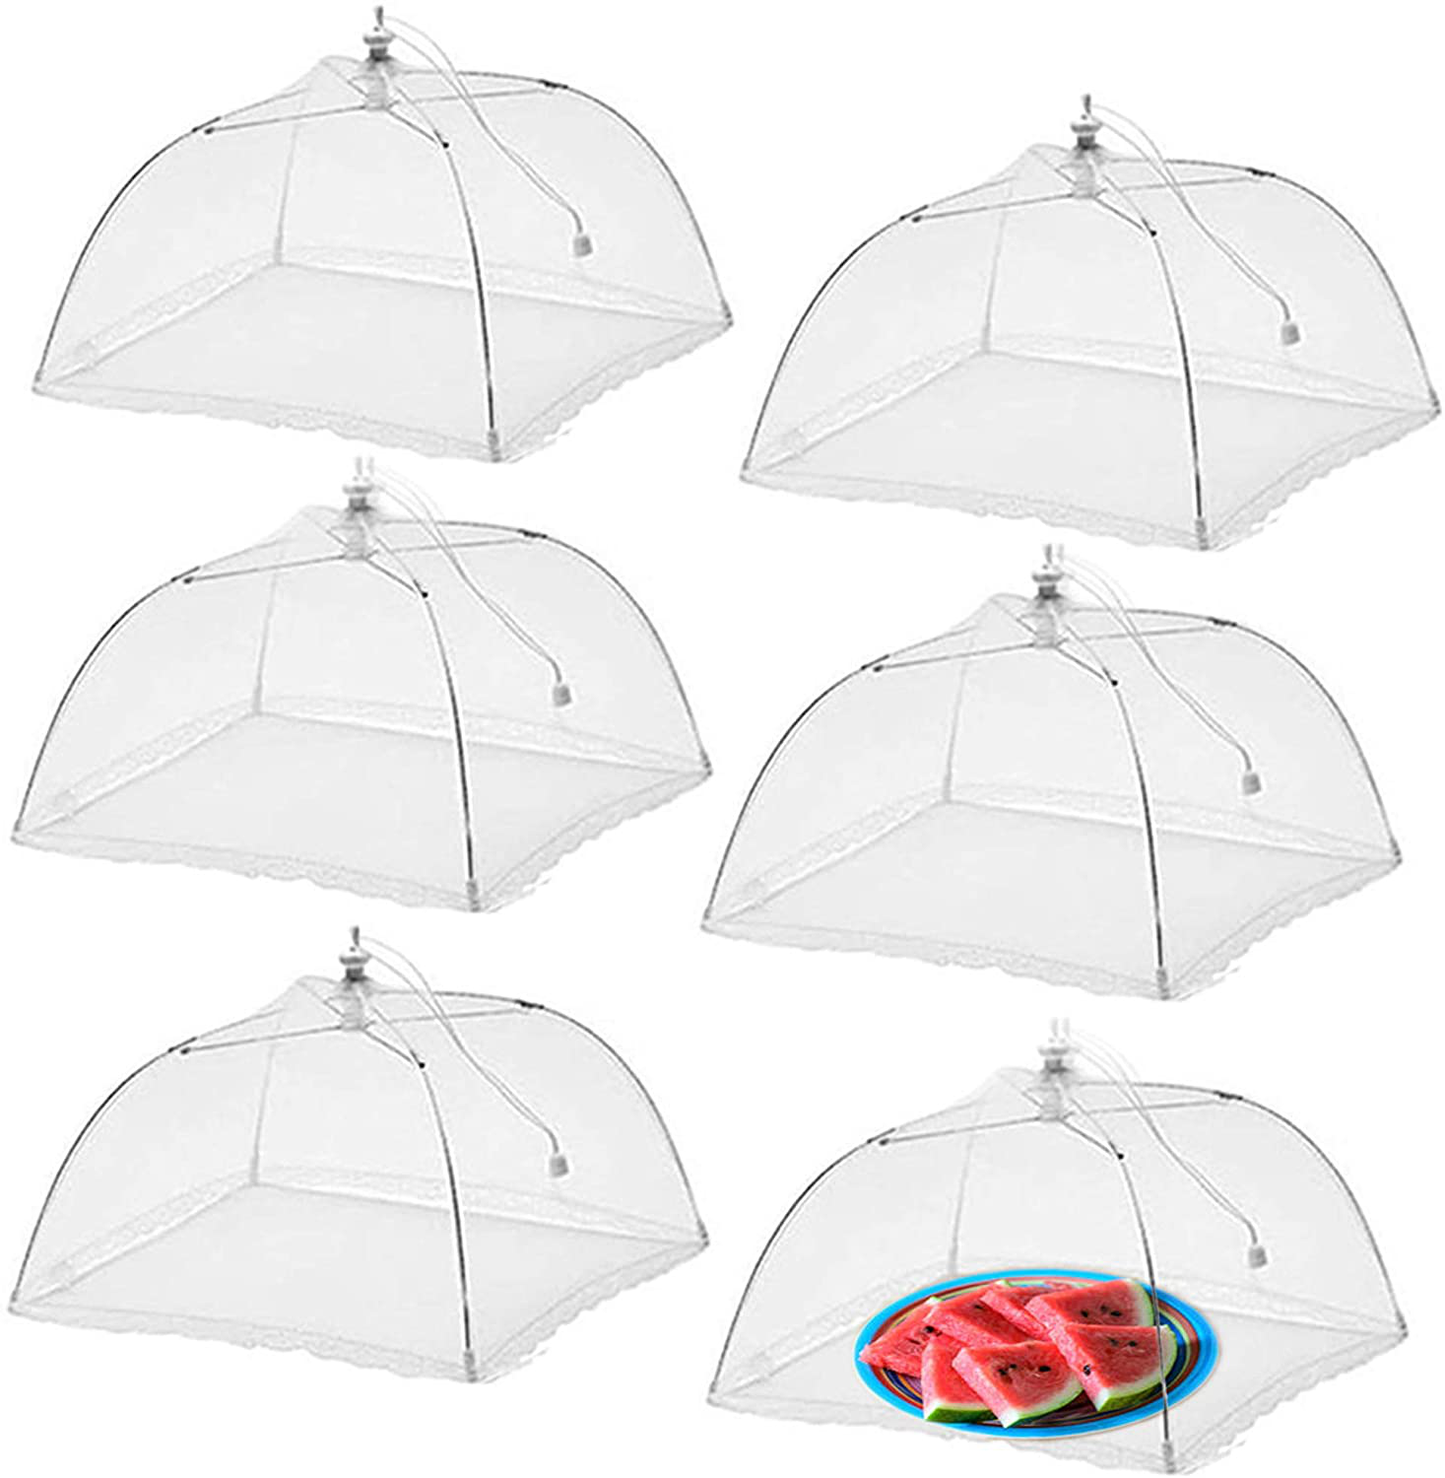 Simply Genius Large and Tall 17x17 Pop-Up Mesh Food Covers Tent Umbrella for Outdoors, Screen Tents, Parties Picnics, BBQs, Reusable and Collapsible